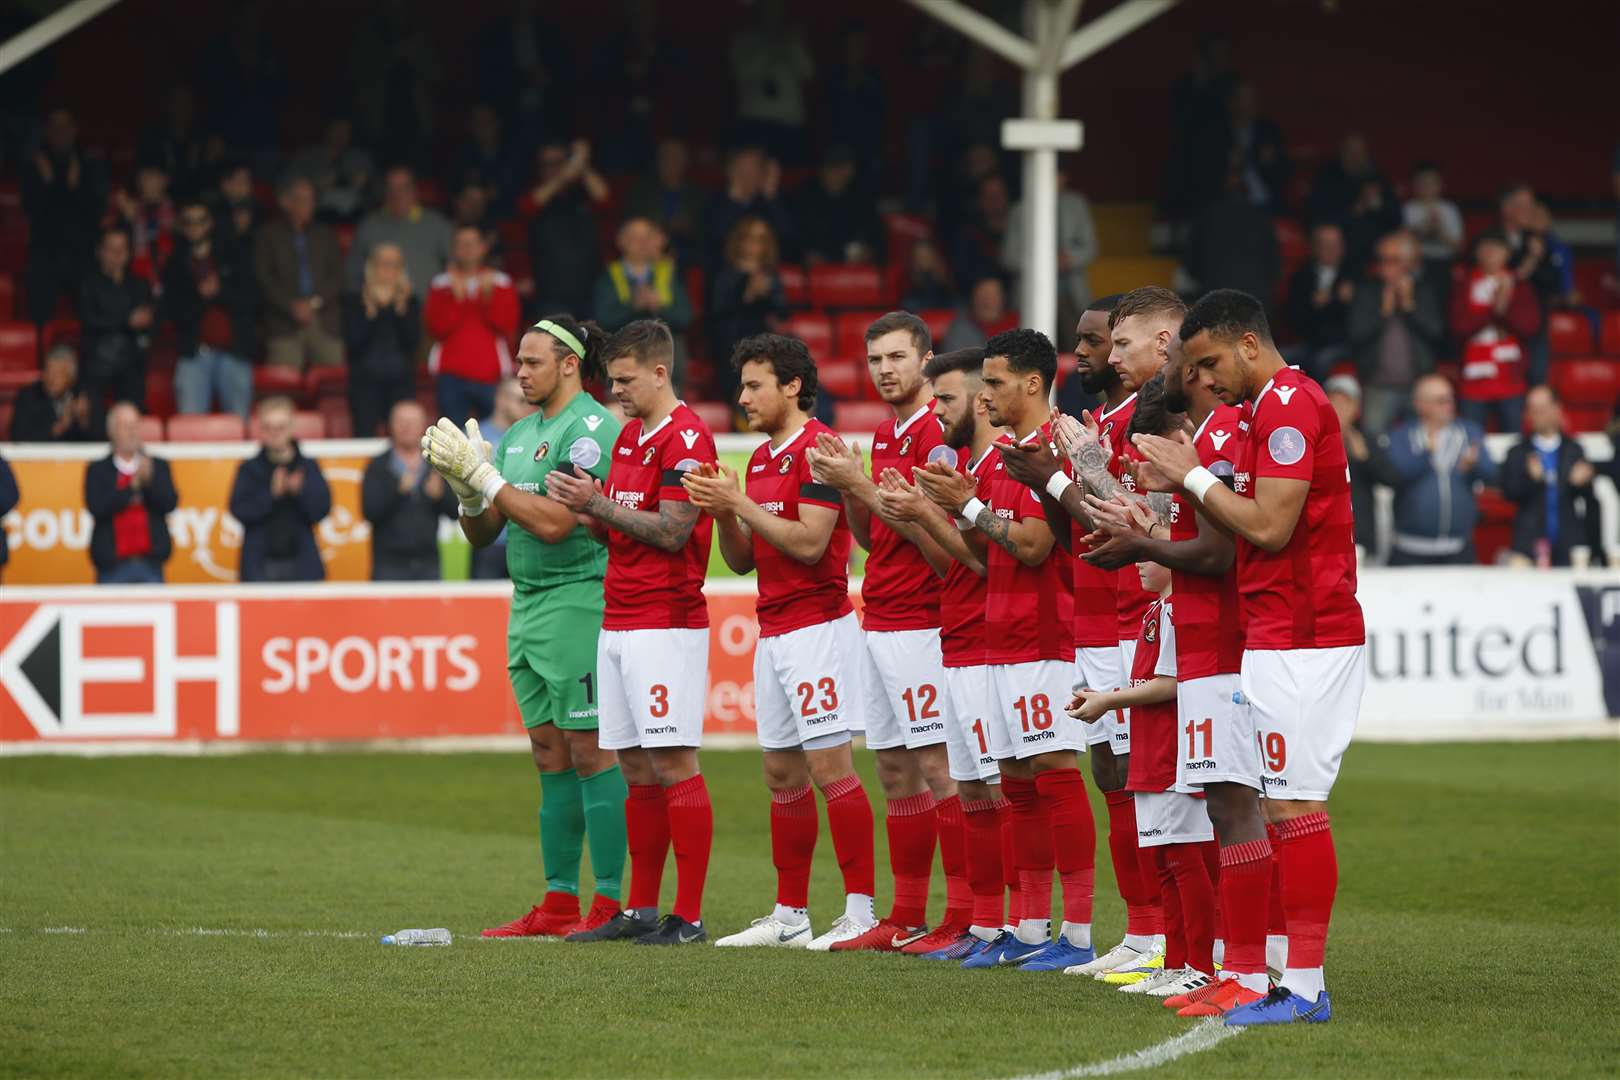 Ebbsfleet United hold a minute's applause for former player Mike Thalassitis before their game with Wrexham last Saturday